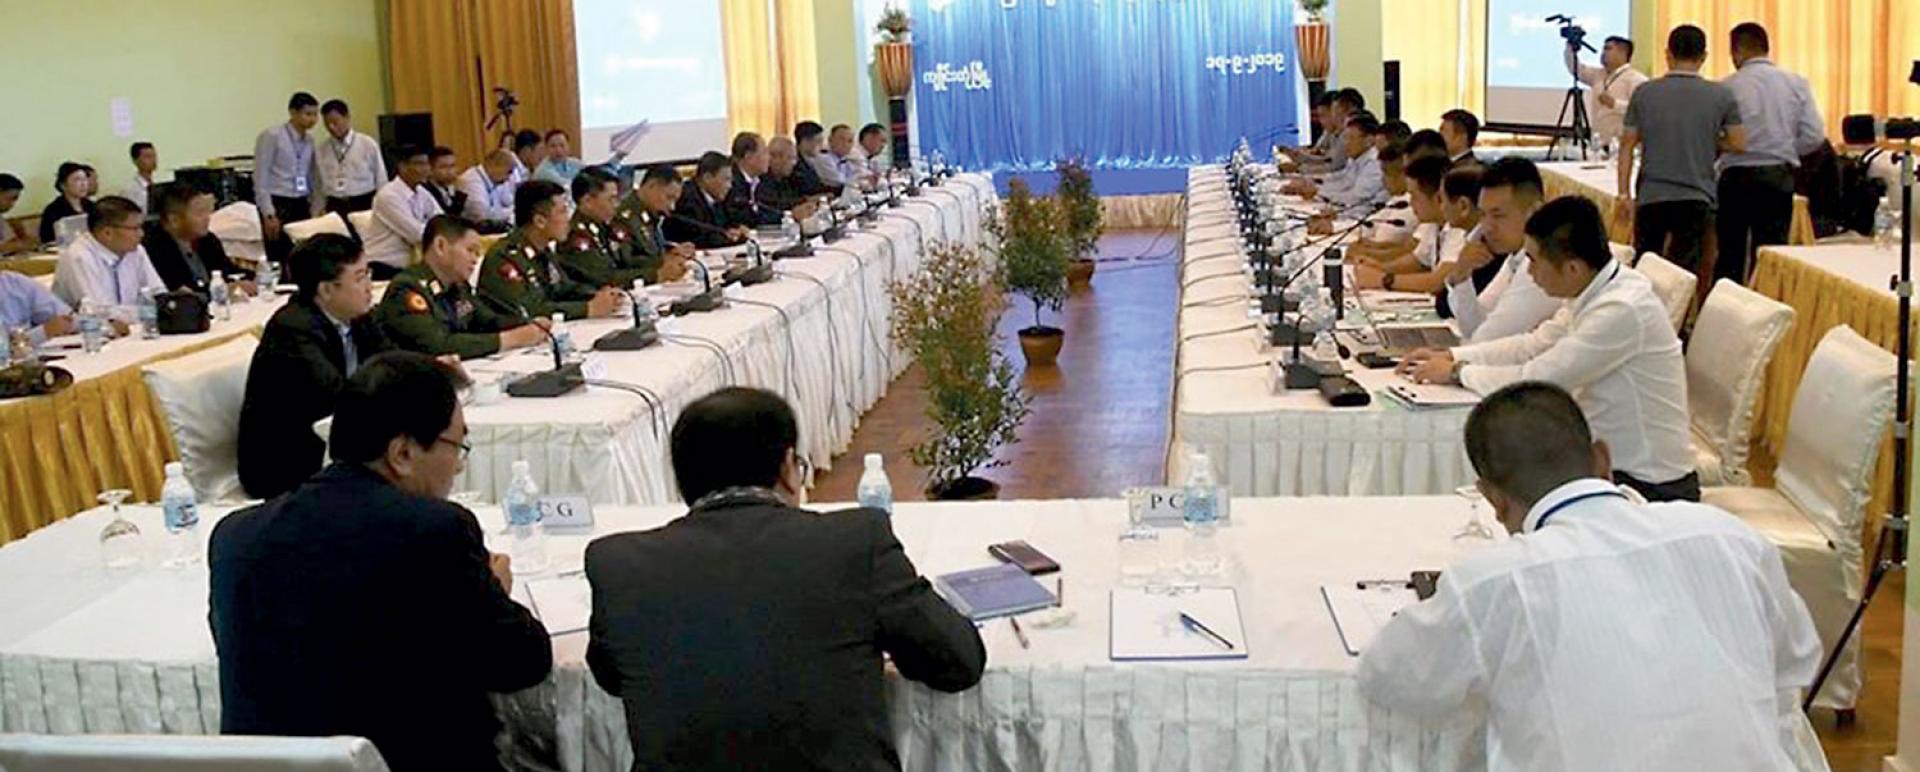 NRPC’s delegates and Northern Alliance held a meeting at Kengtung, on September 17th for signing bilateral ceasefire agreement.